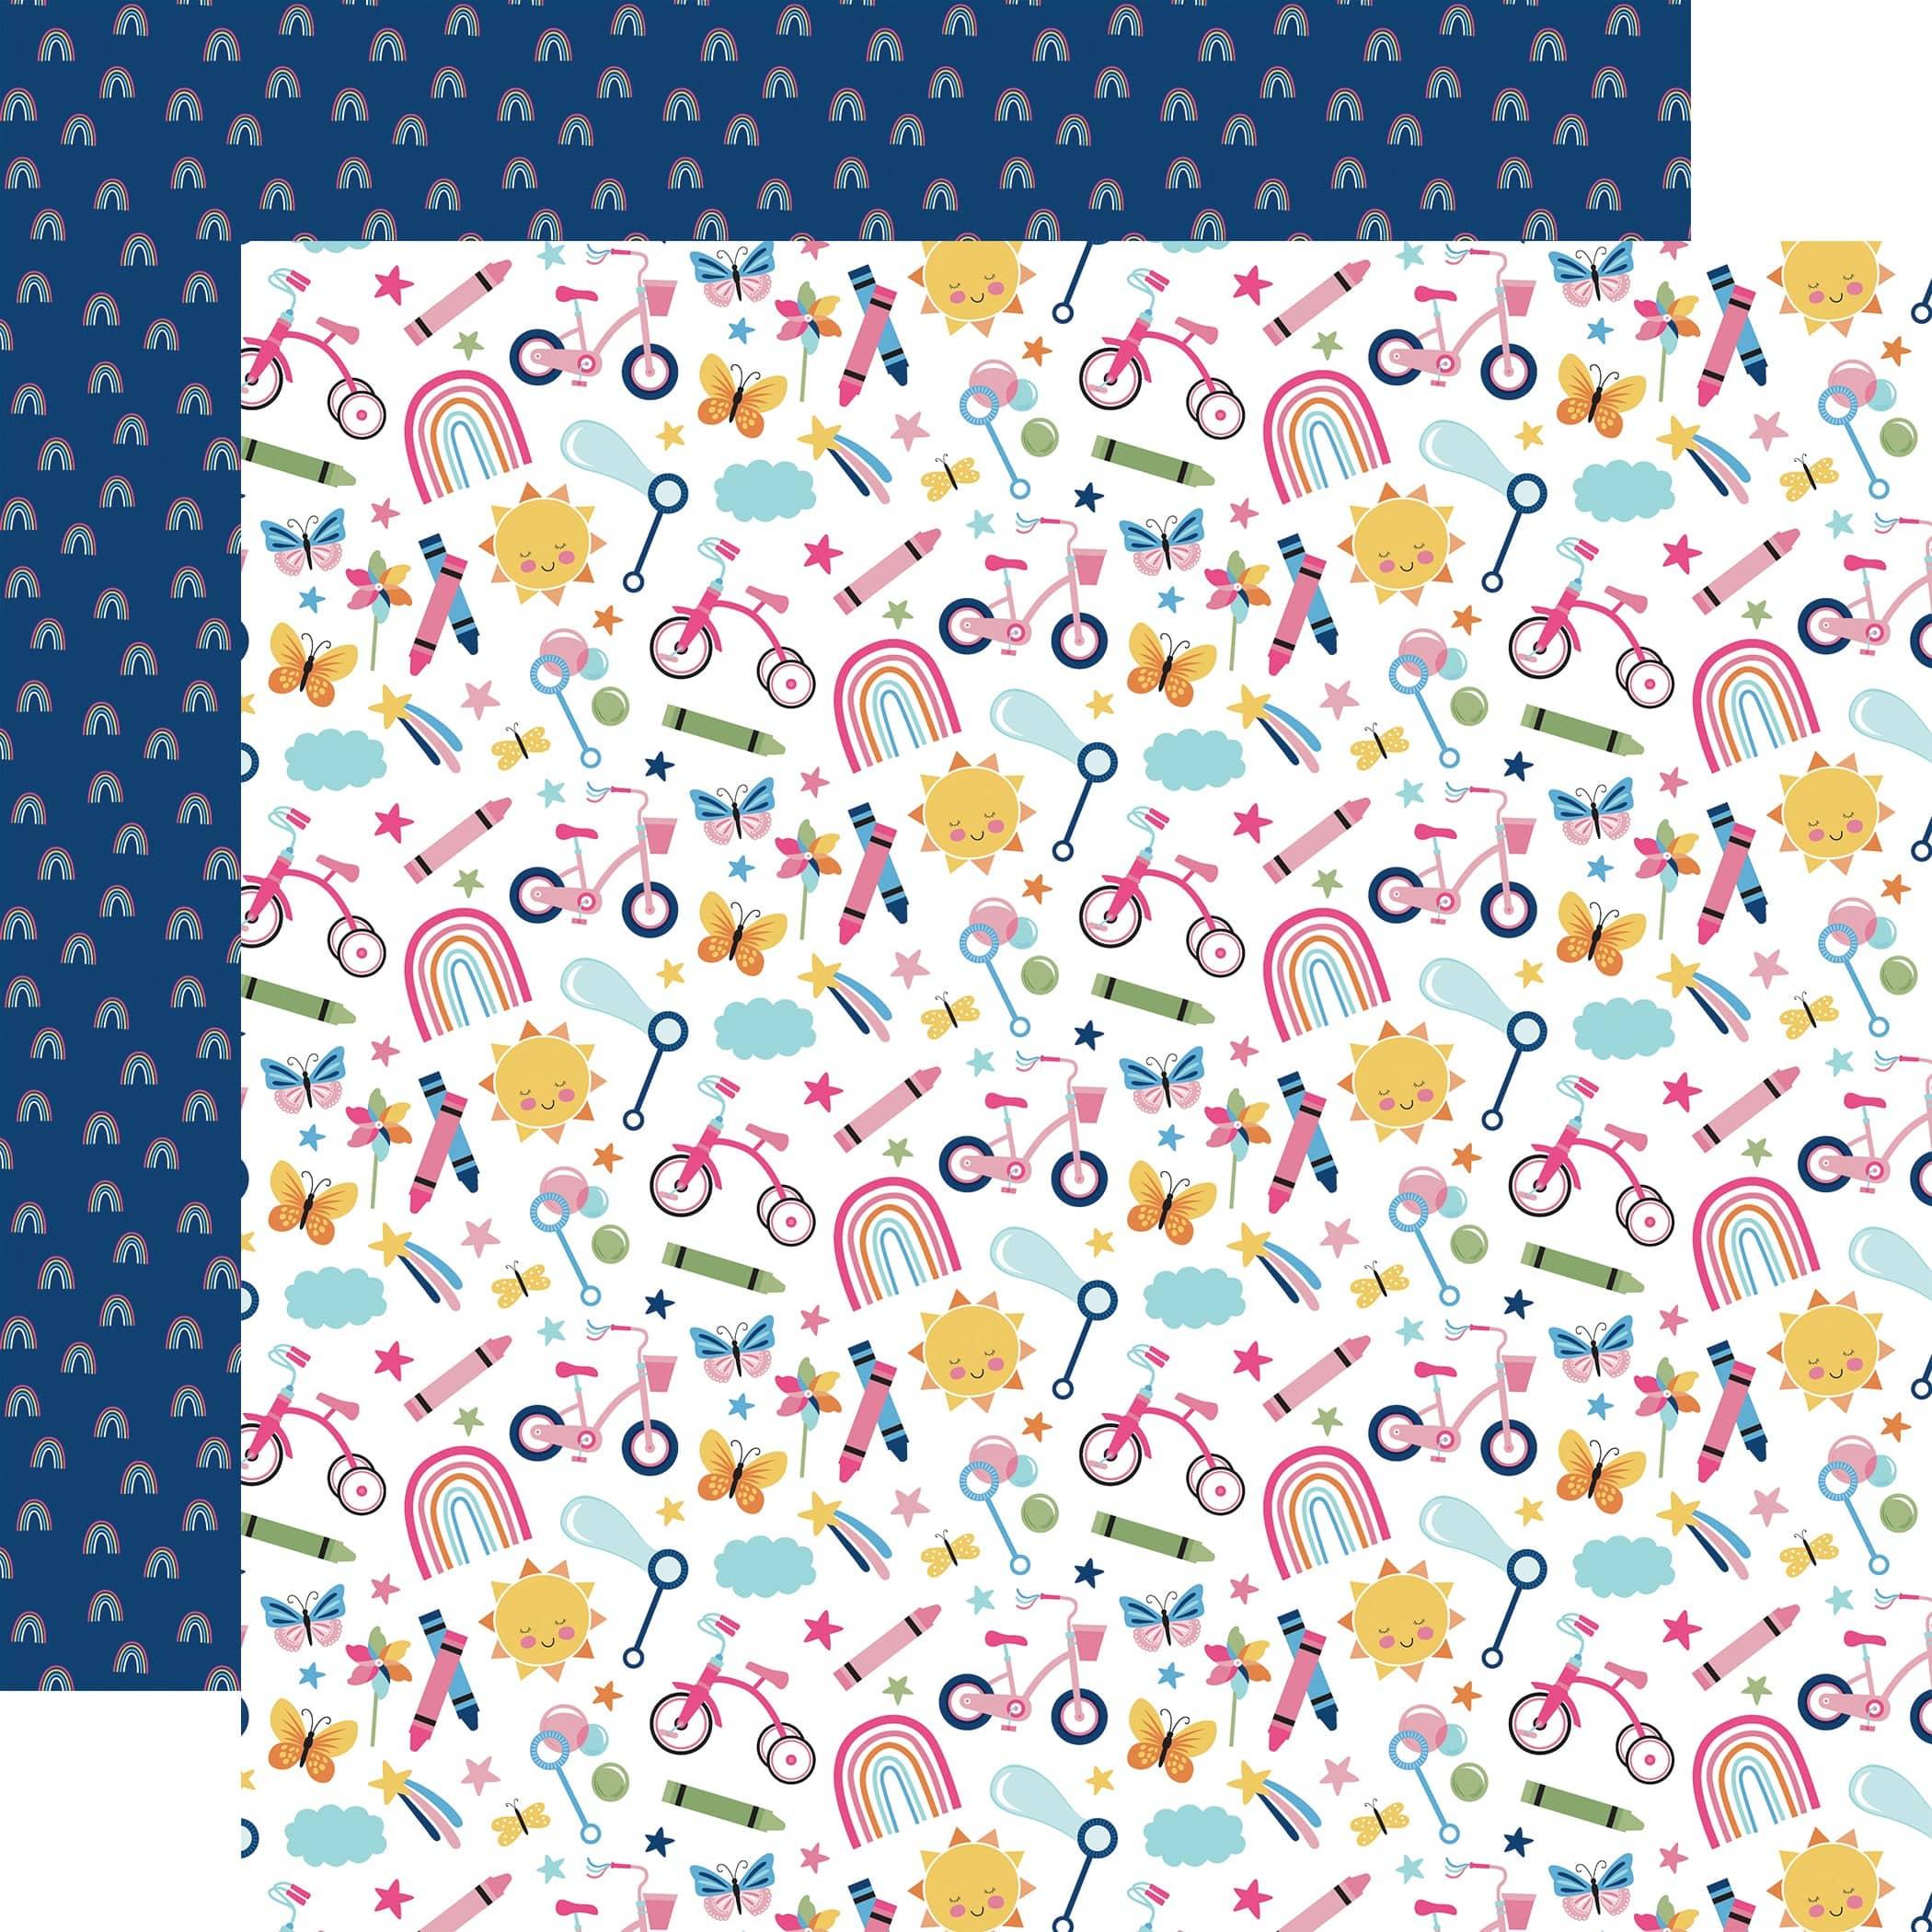 Play All Day Girl Collection Playdate 12 x 12 Double-Sided Scrapbook Paper by Echo Park Paper - Scrapbook Supply Companies